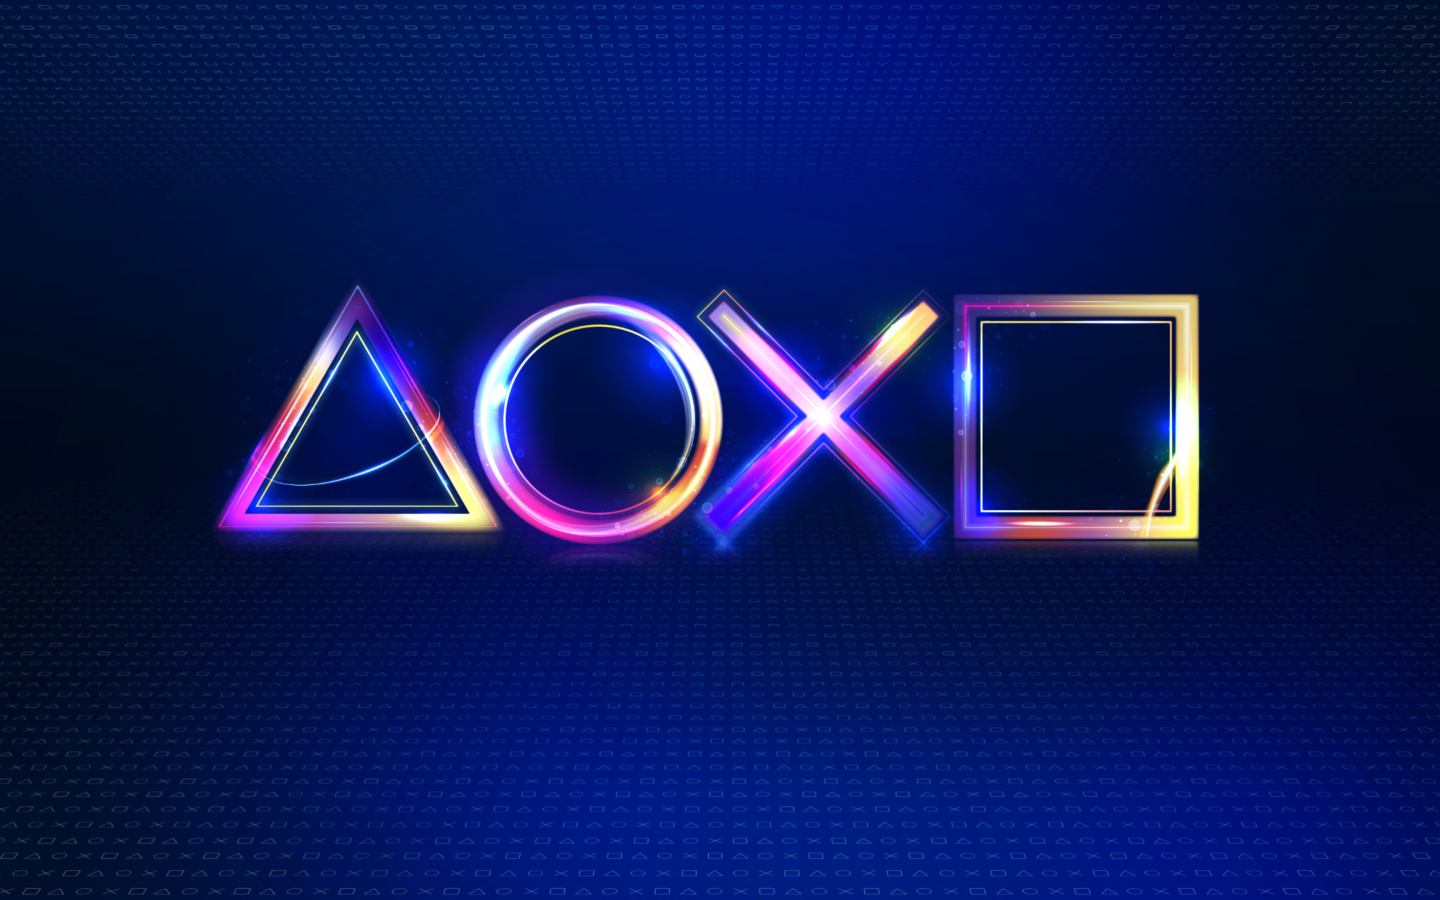 PlayStation neon signs on a blue background